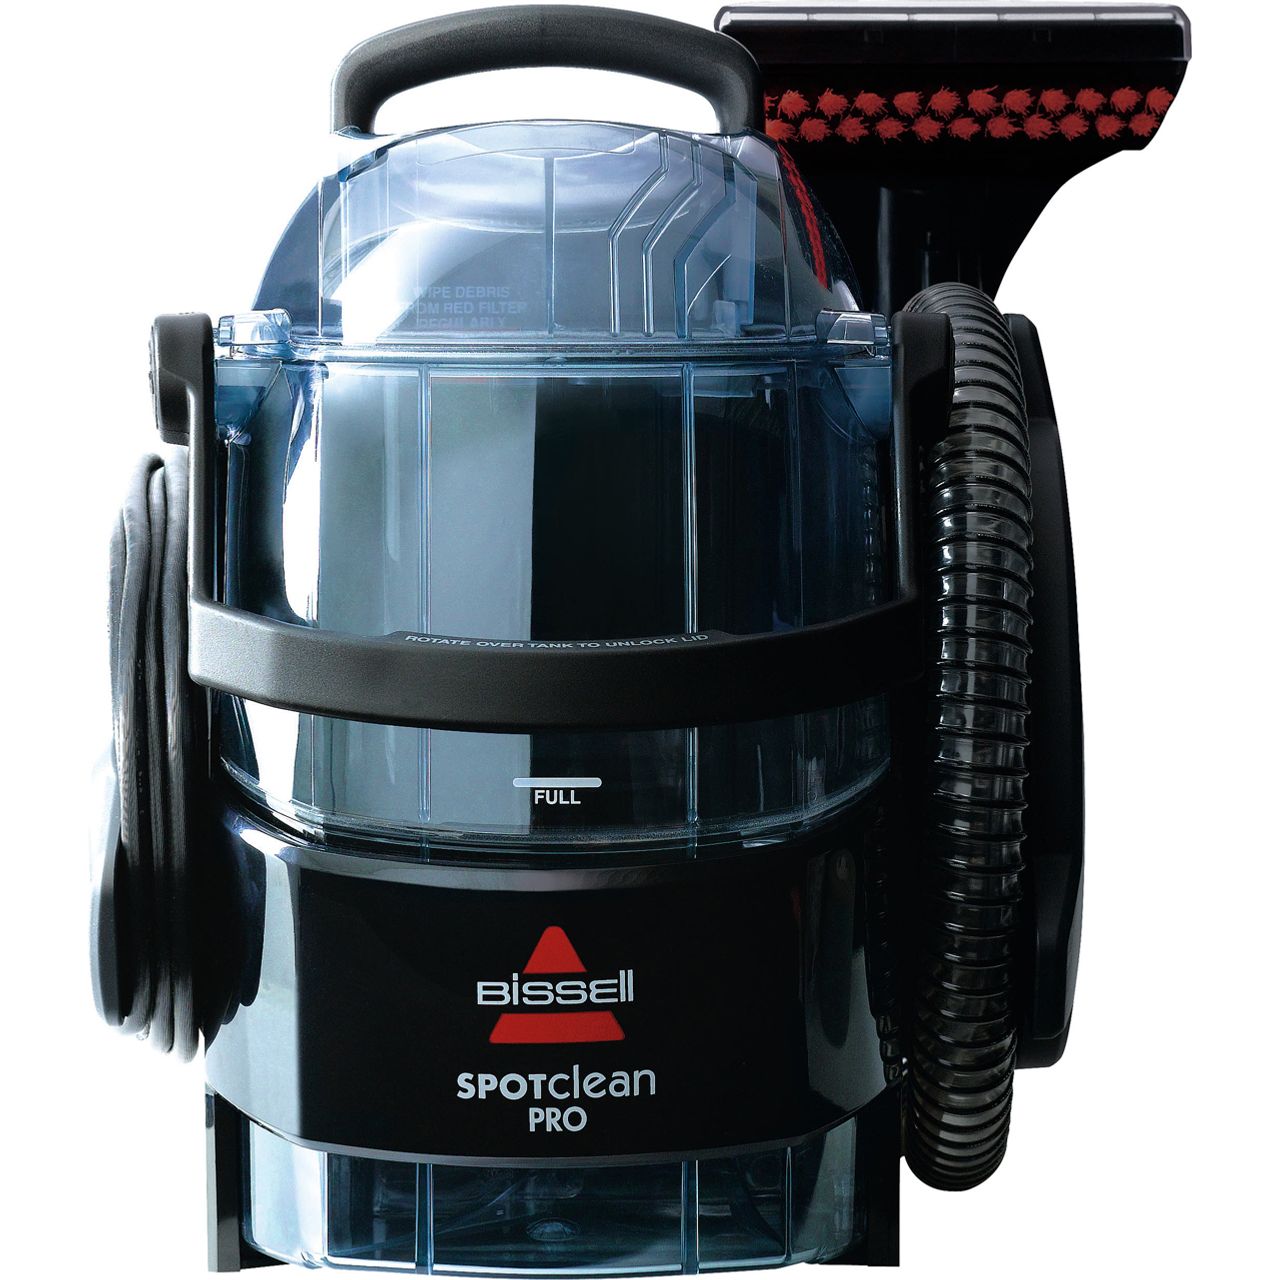 BISSELL SpotClean Pro 1558E, Most Powerful Portable Professional Carpet  Cleaner, 750W Power Suction, Removes Spots, Spills & Stains, Cleans Carpets  Stairs, Upholstery and Car Seats, Black